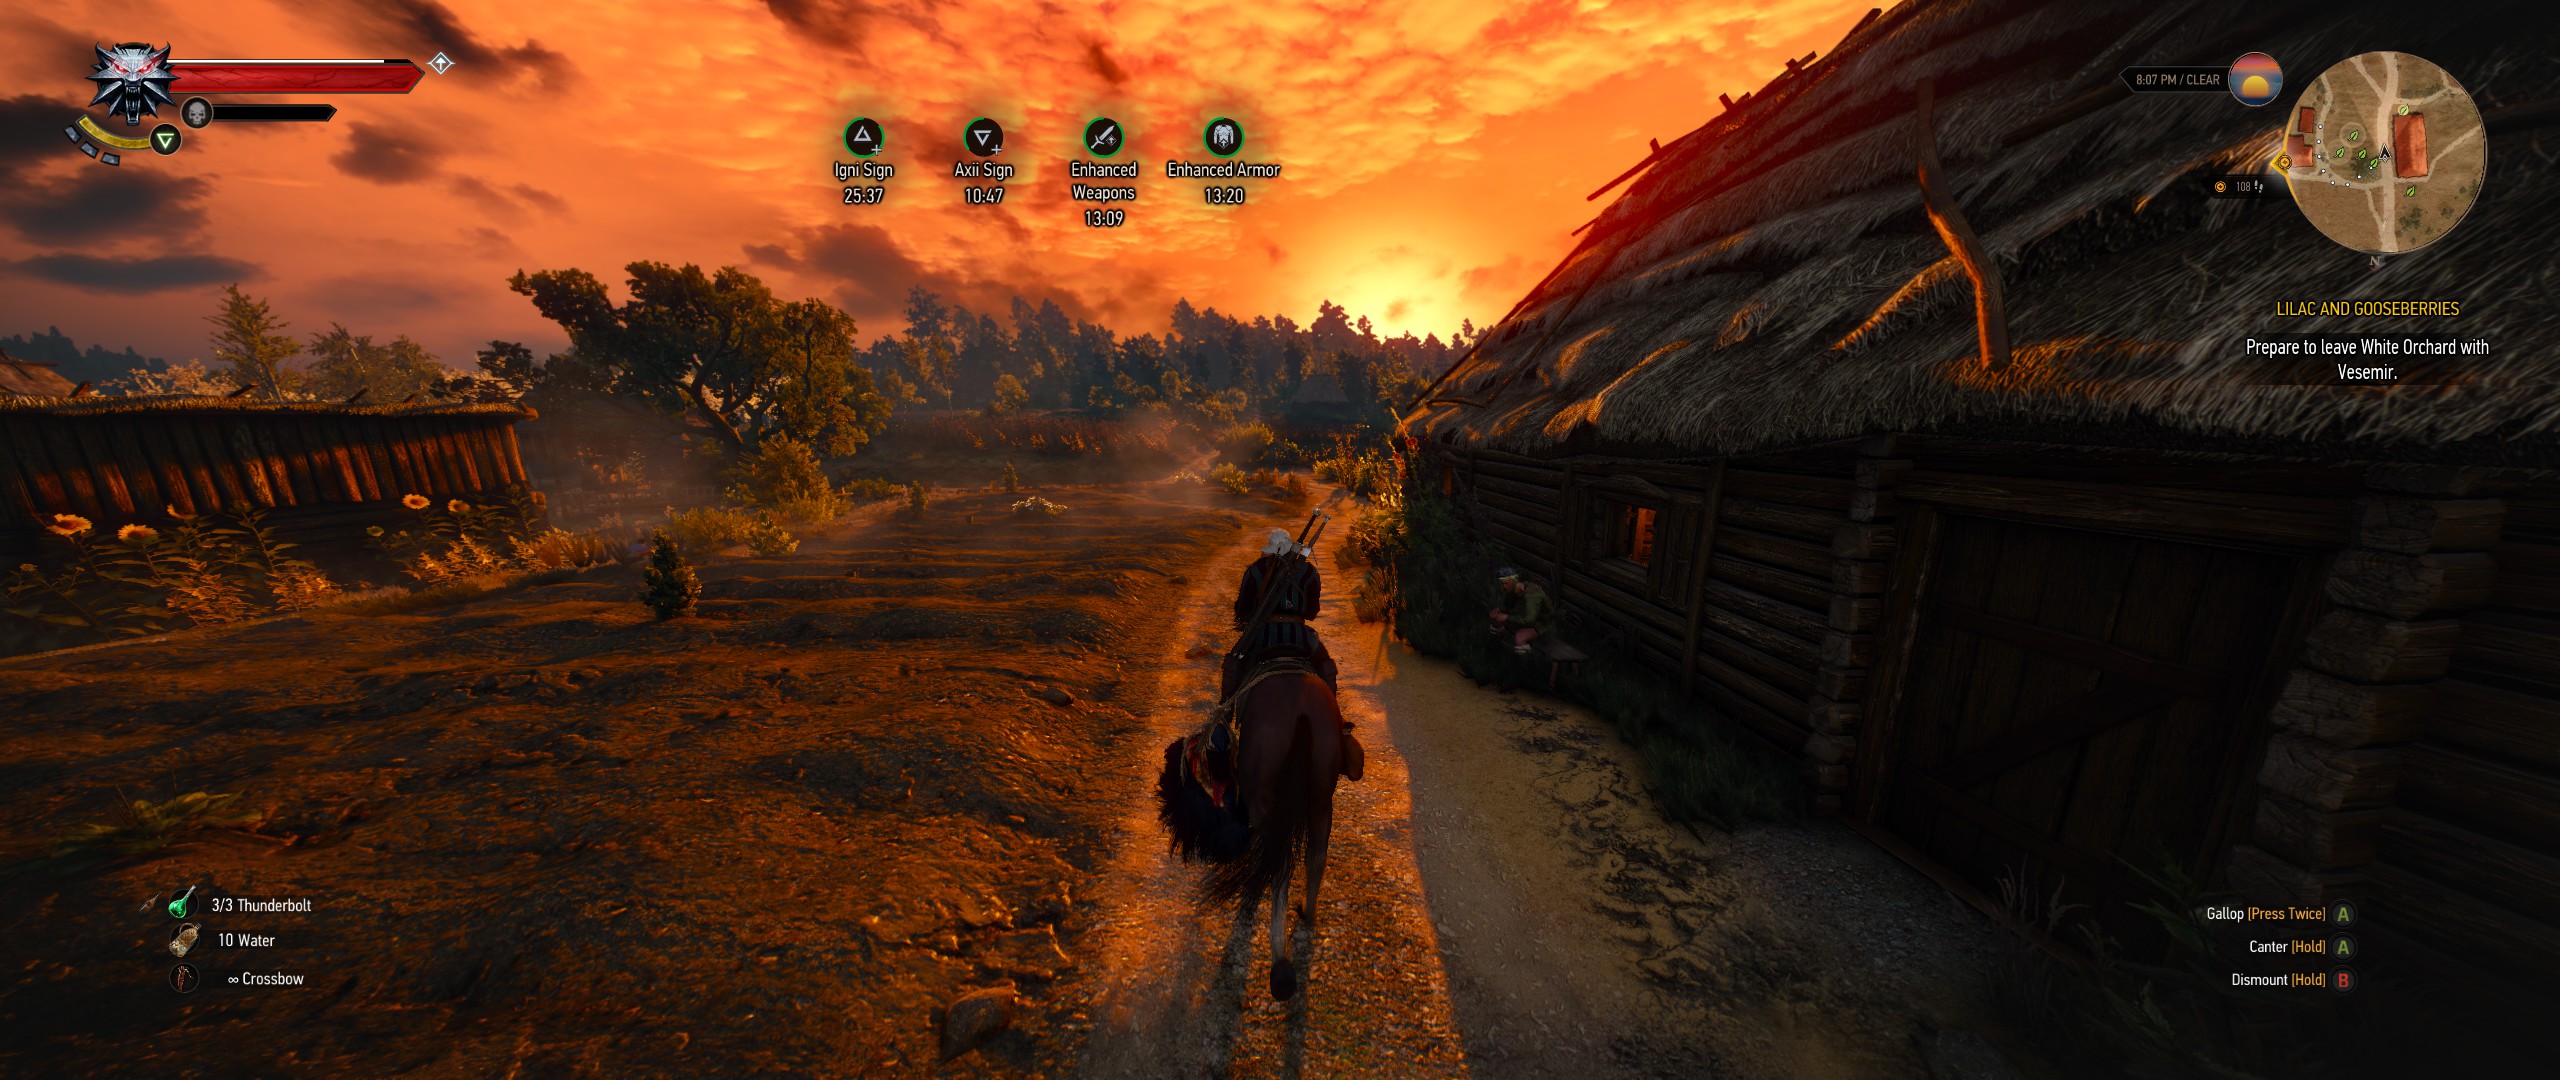 Witcher 3-Part 3 ( Expansion Edition) - Page 17 ?interpolation=lanczos-none&output-format=jpeg&output-quality=100&fit=inside|2560:1080&composite-to=*,*|2560:1080&background-color=black